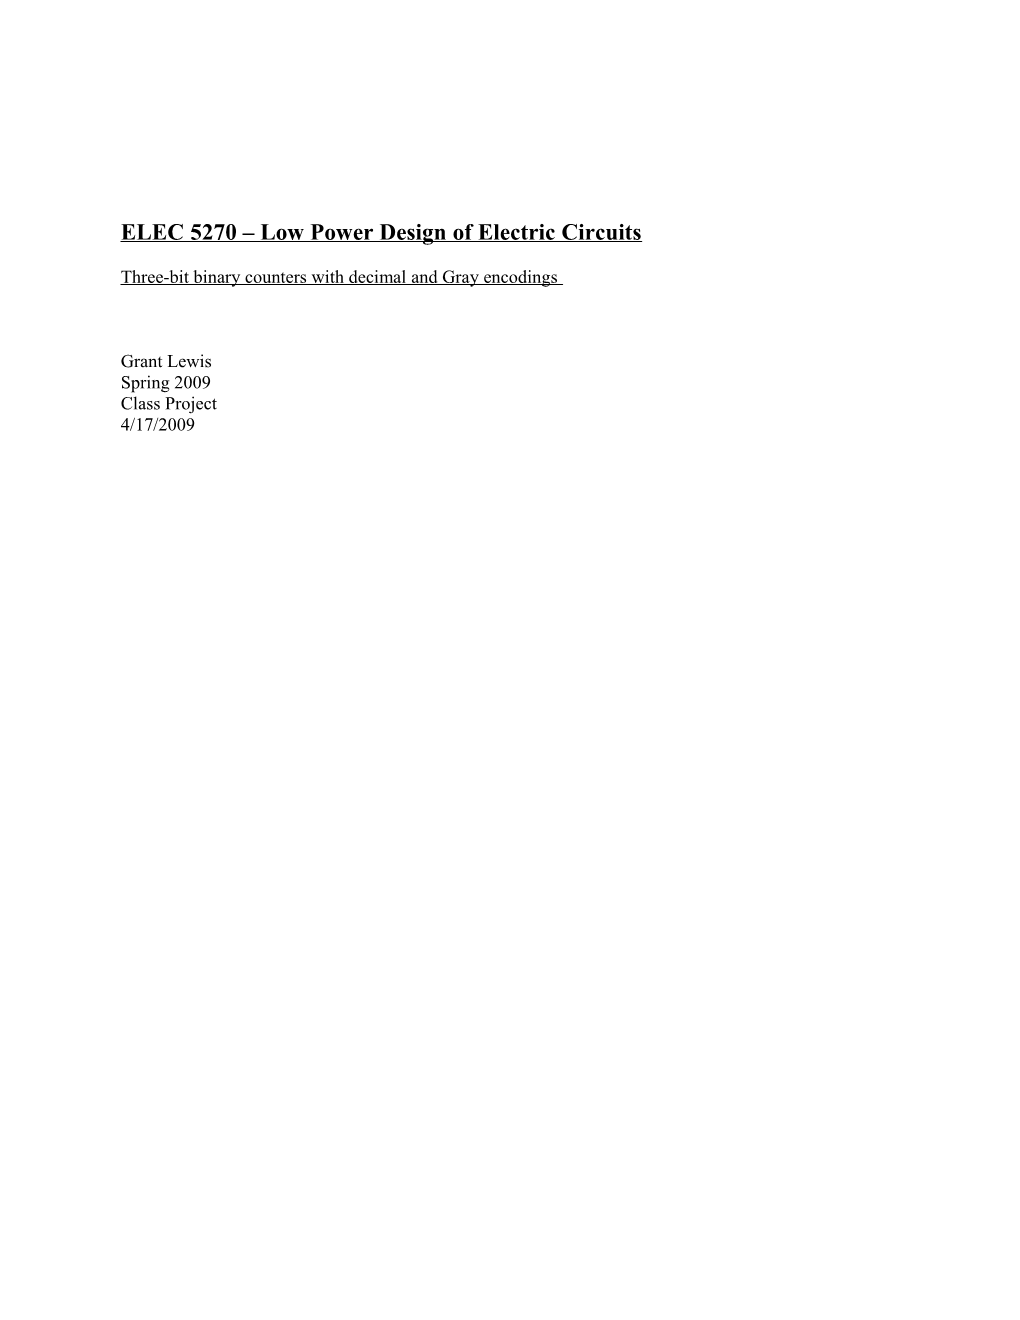 ELEC 5270 Low Power Design of Electric Circuits